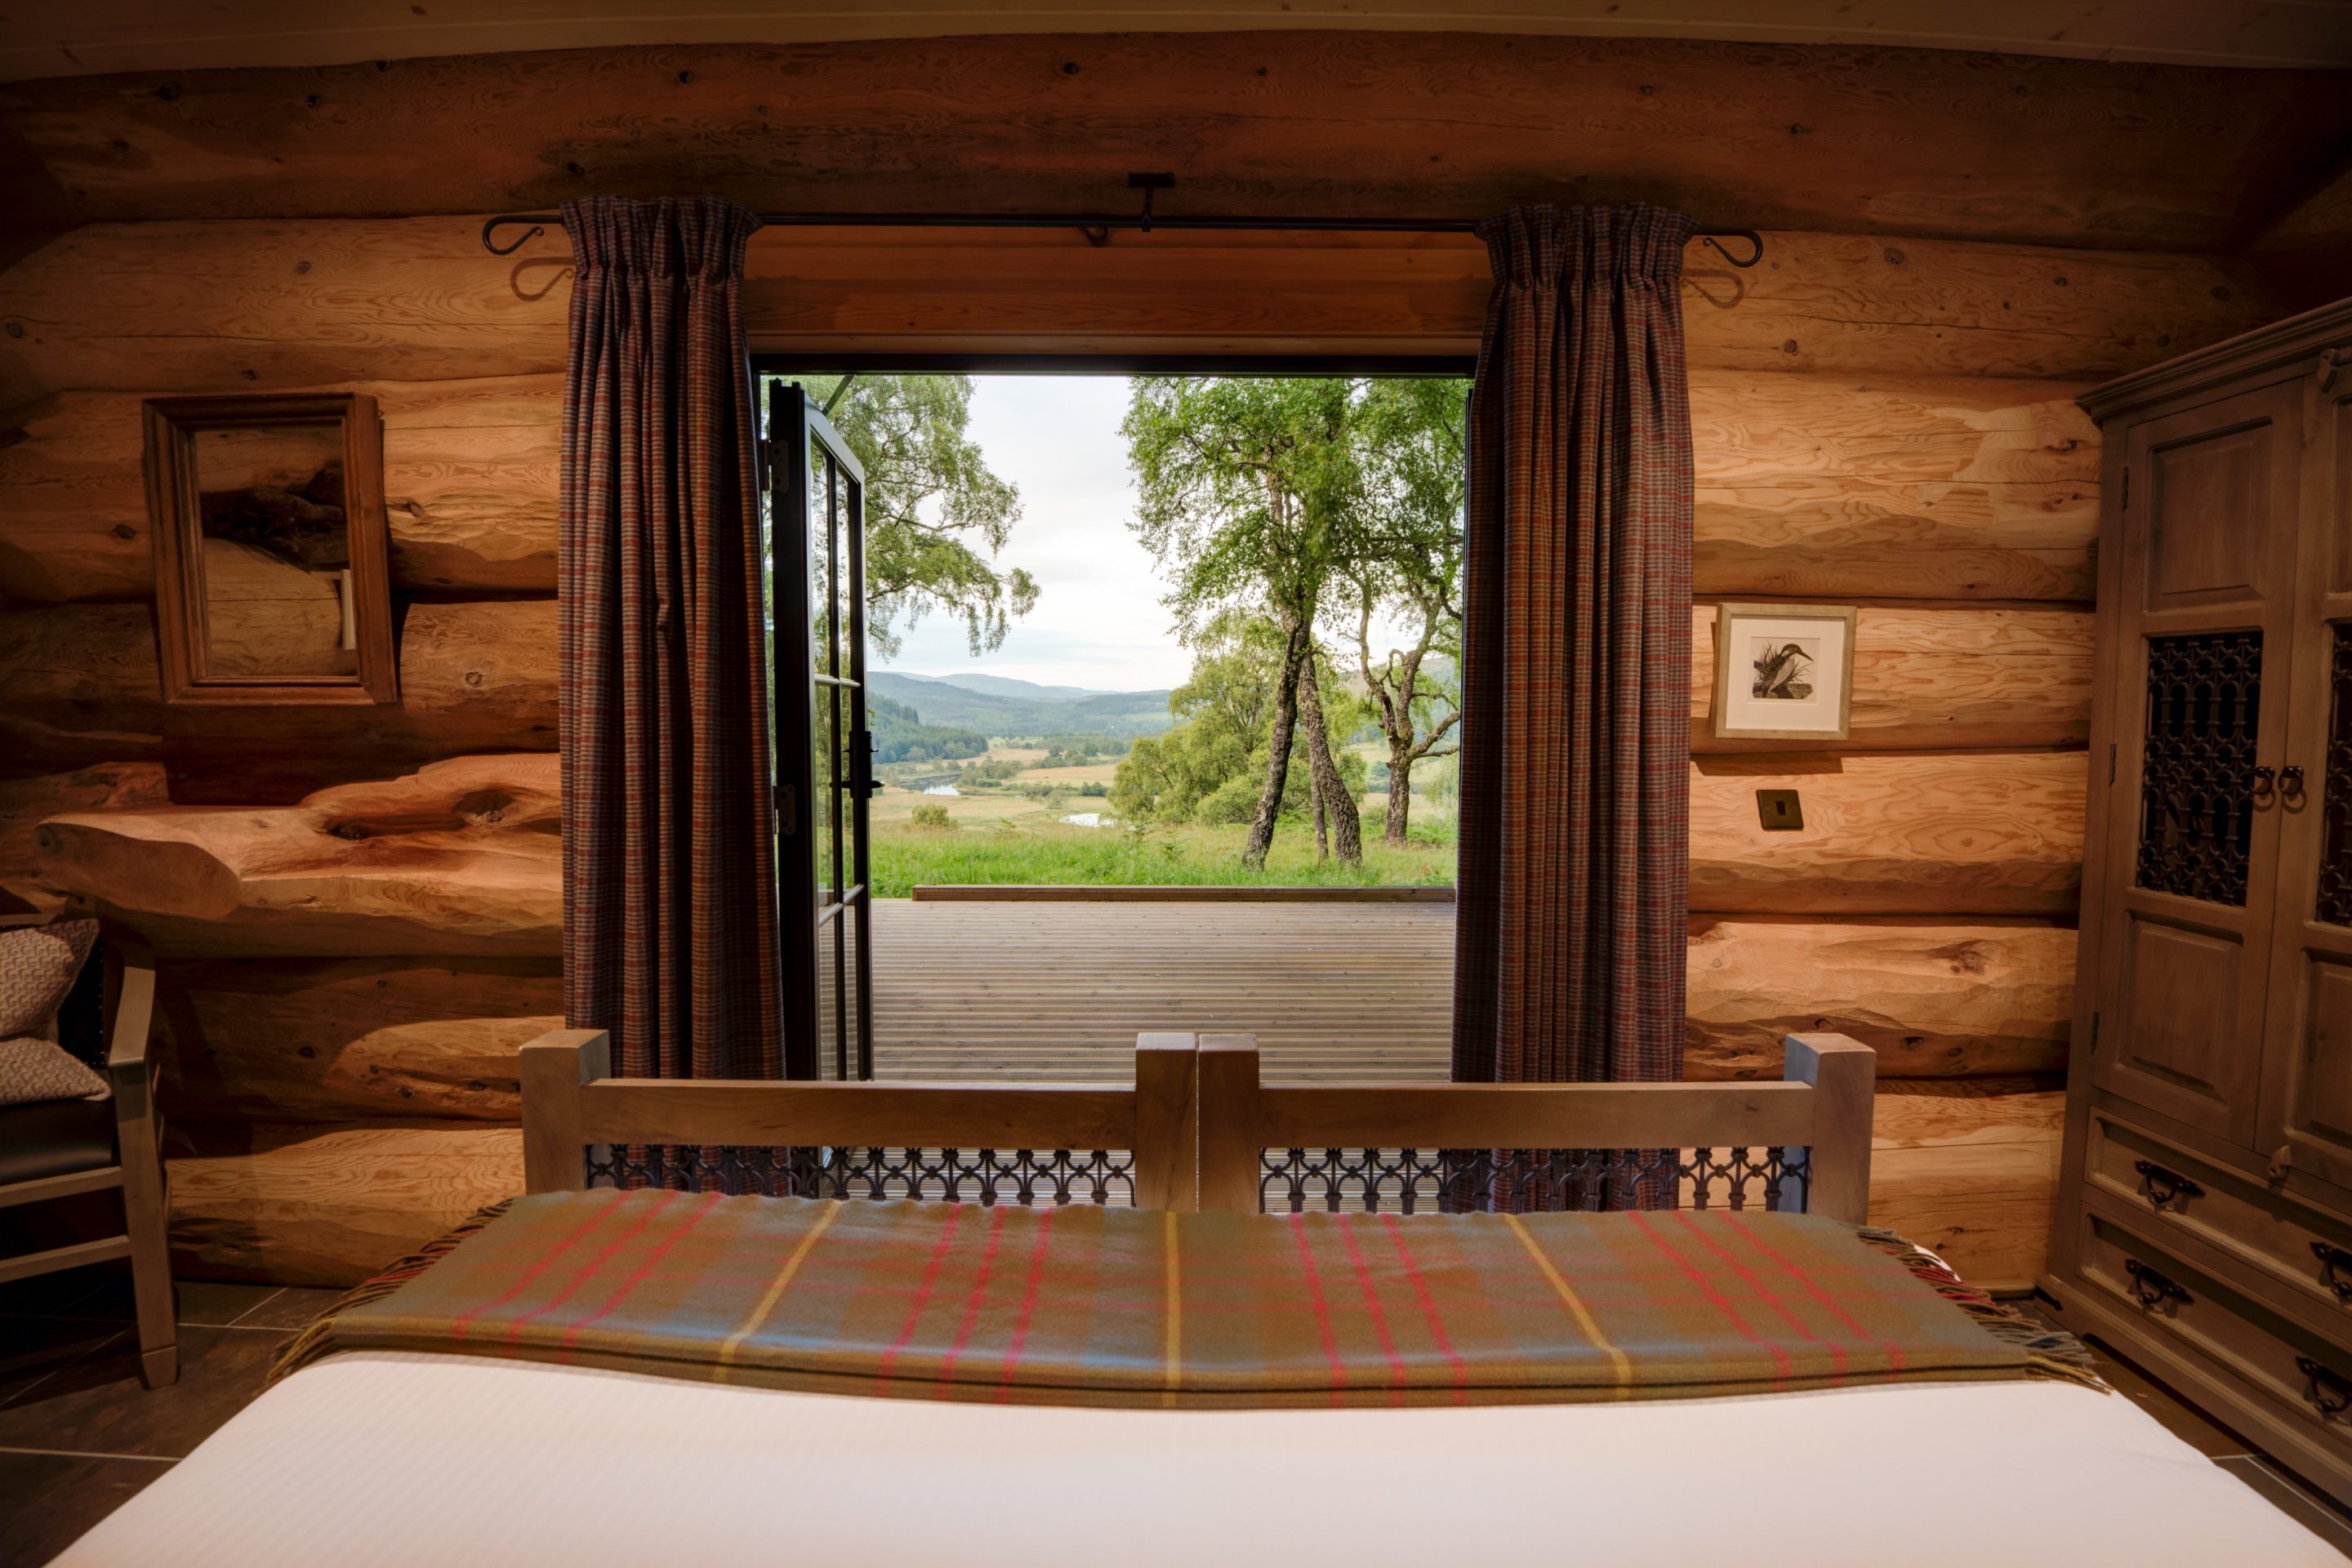 A view outside from inside an Eagle Brae cabin called Certhia